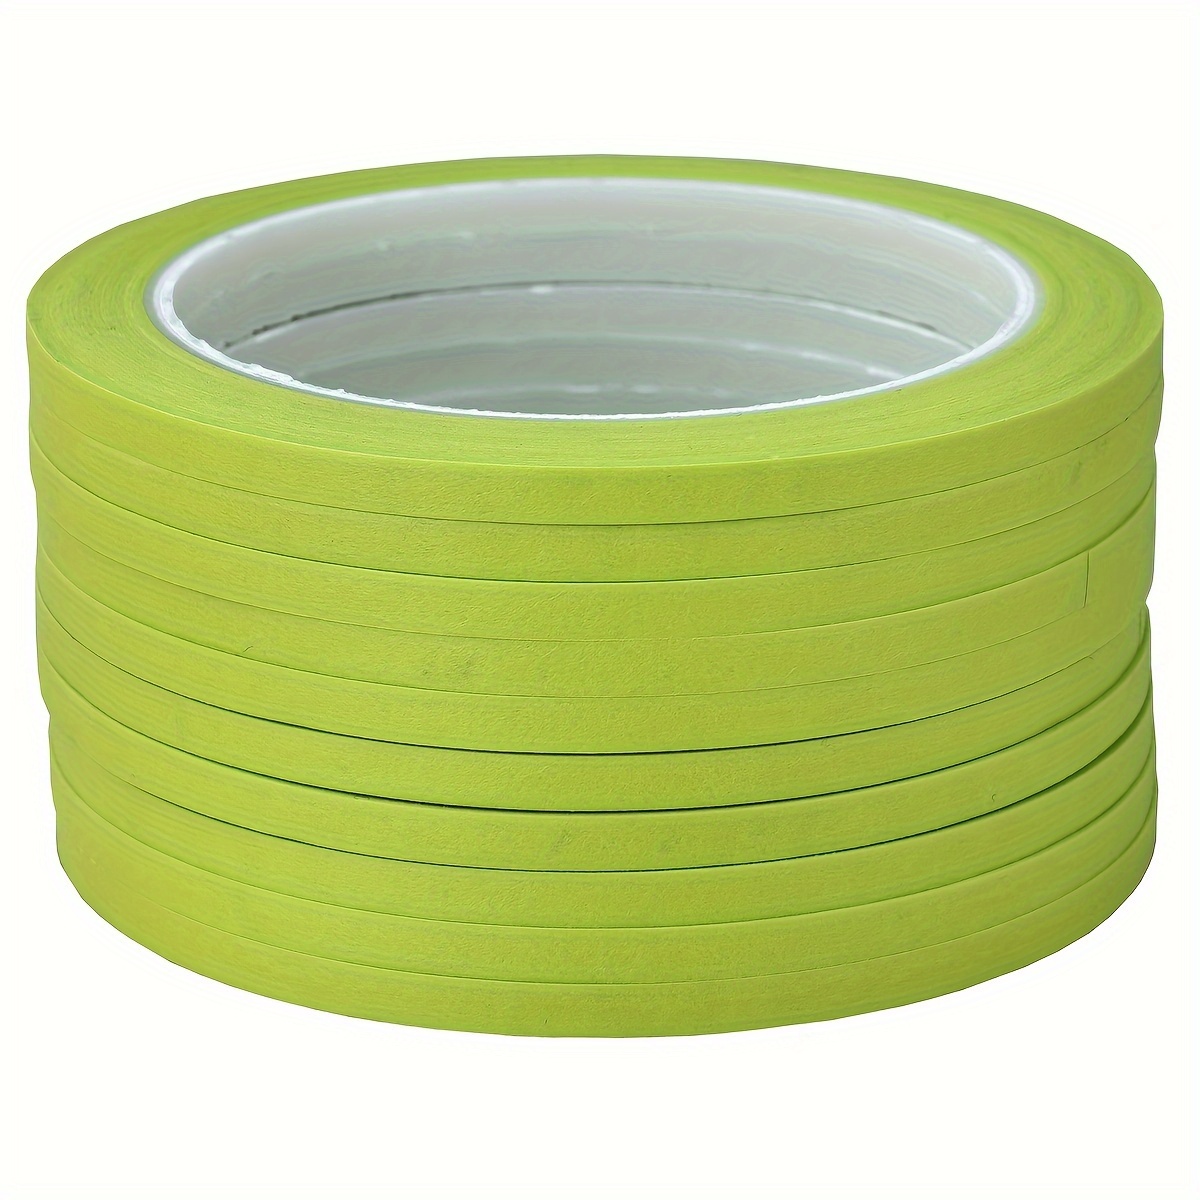 

10 Rolls Of Green Washi Masking Paper Tape, Decorative Tape For Diy Crafts